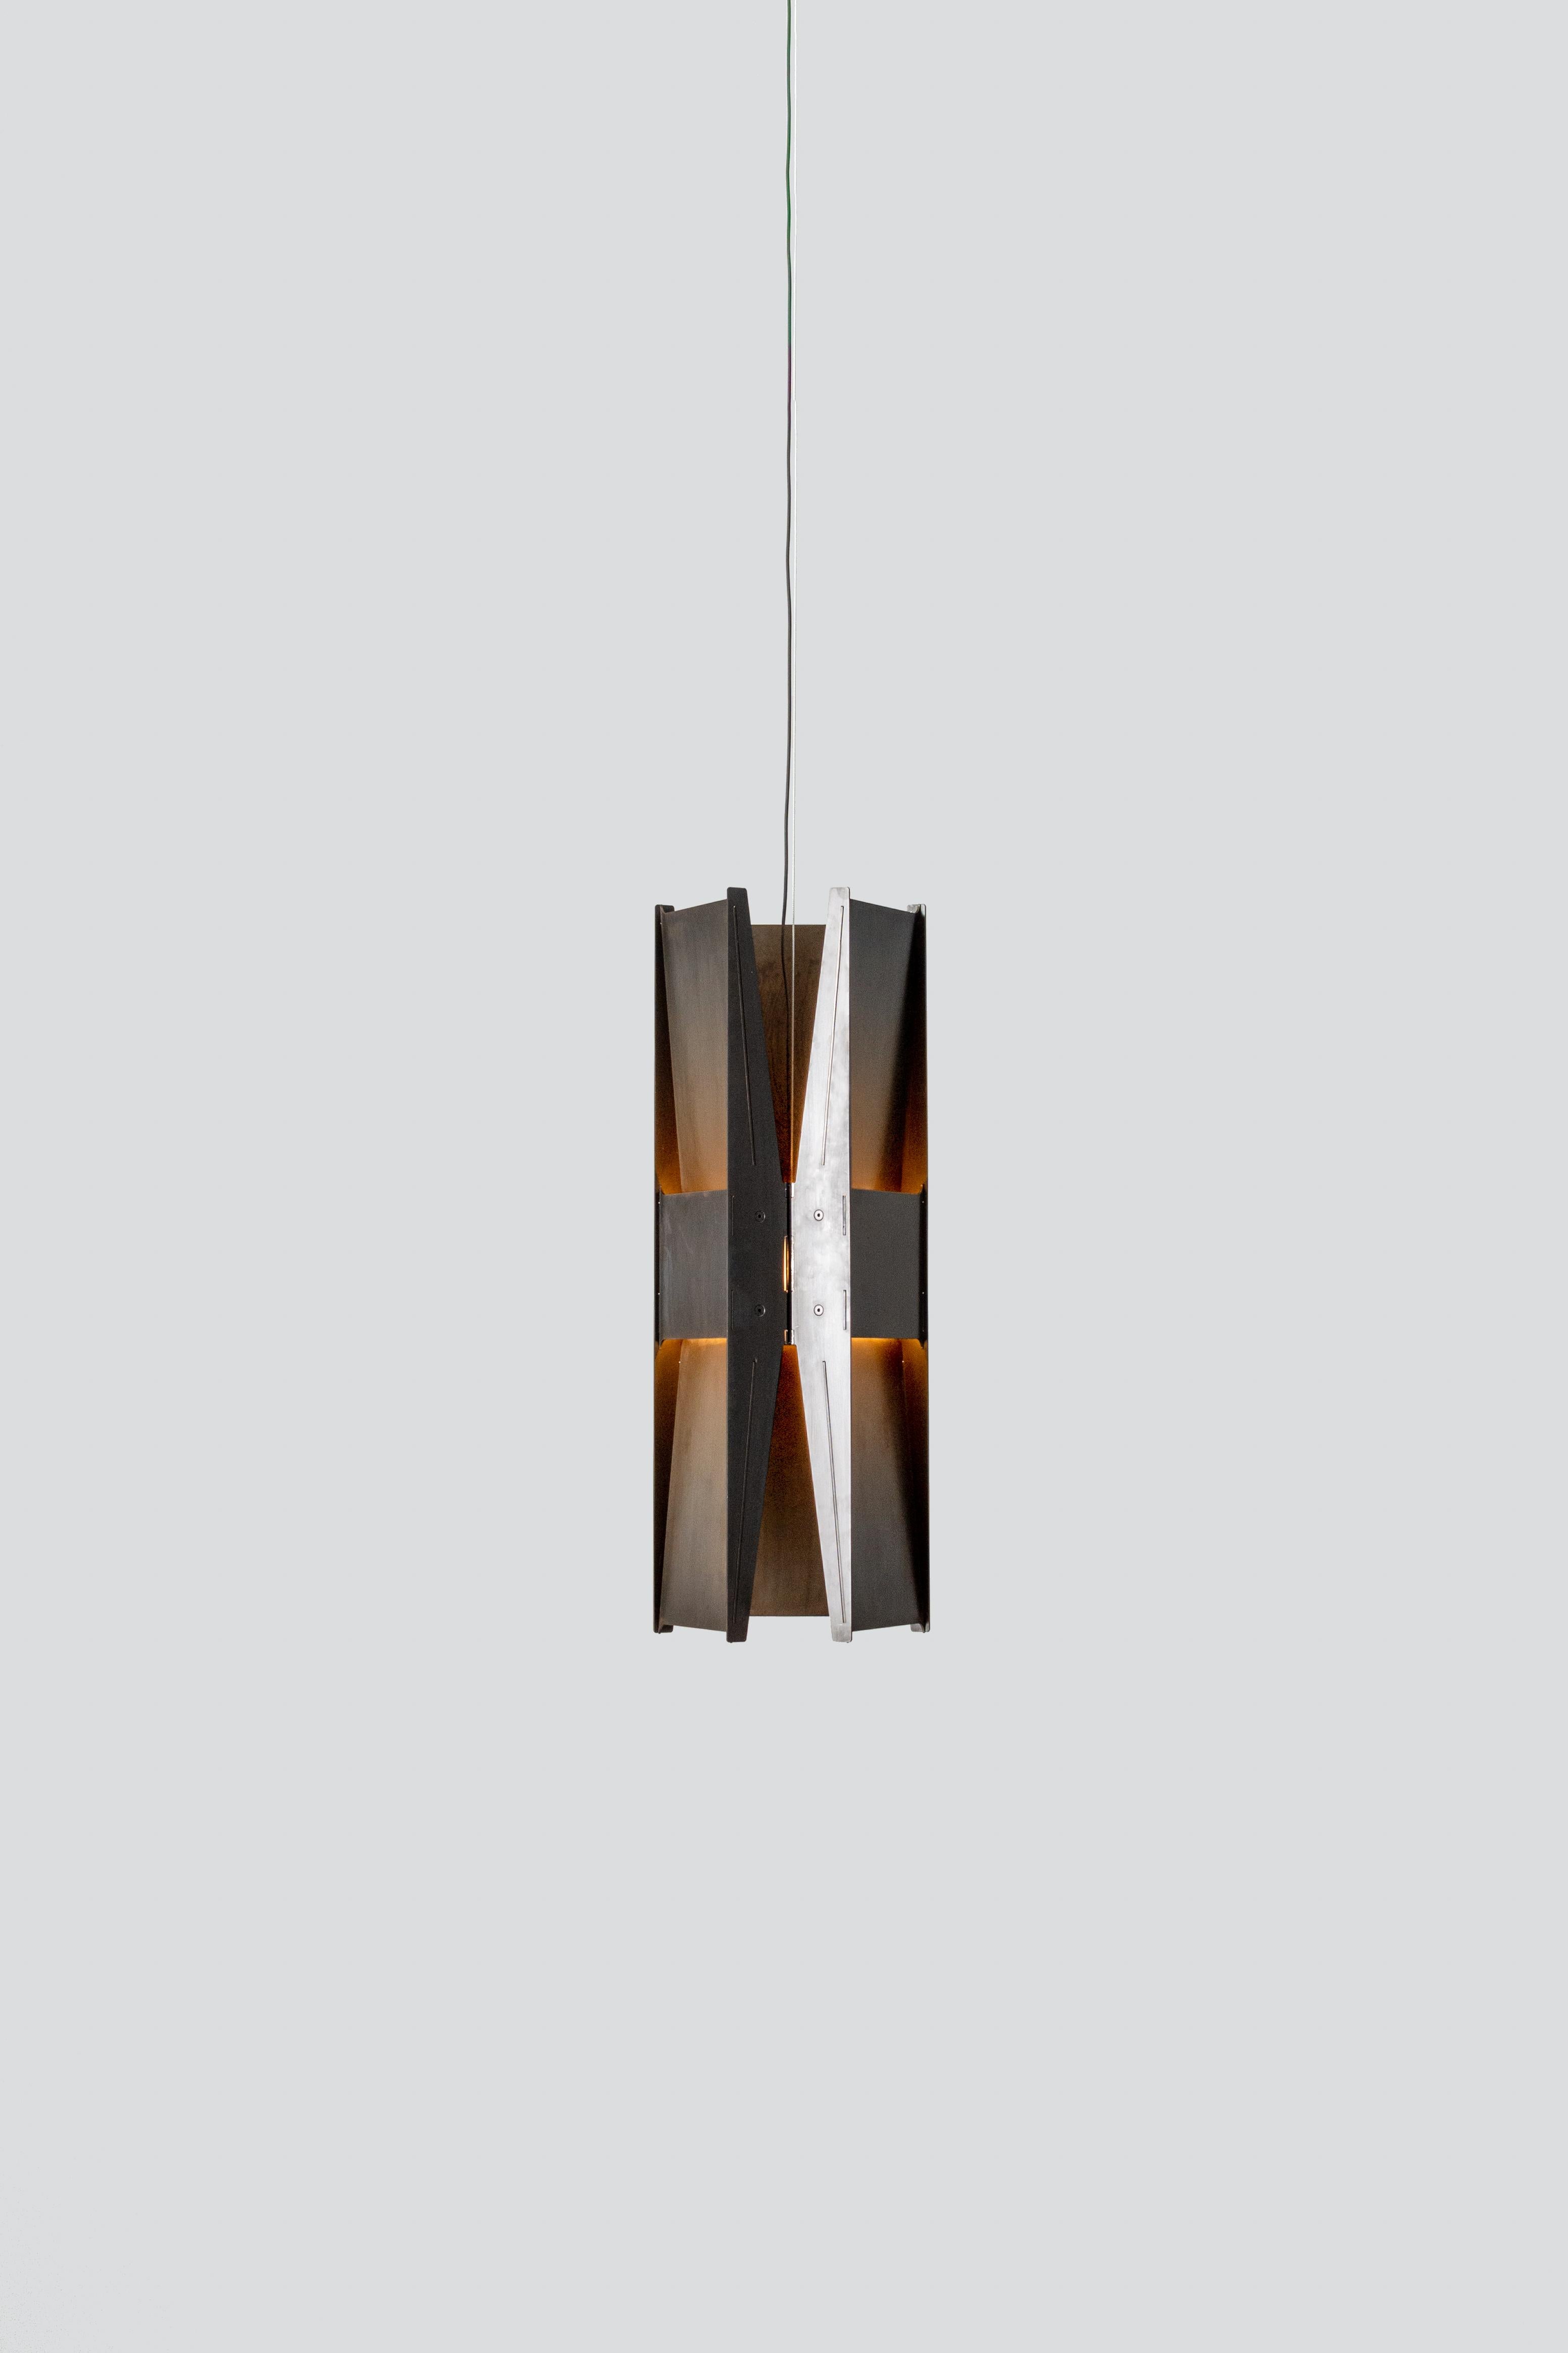 Canadian Contemporary Pendant Lamp 'Vector 3' by A-N-D, Black Steel For Sale